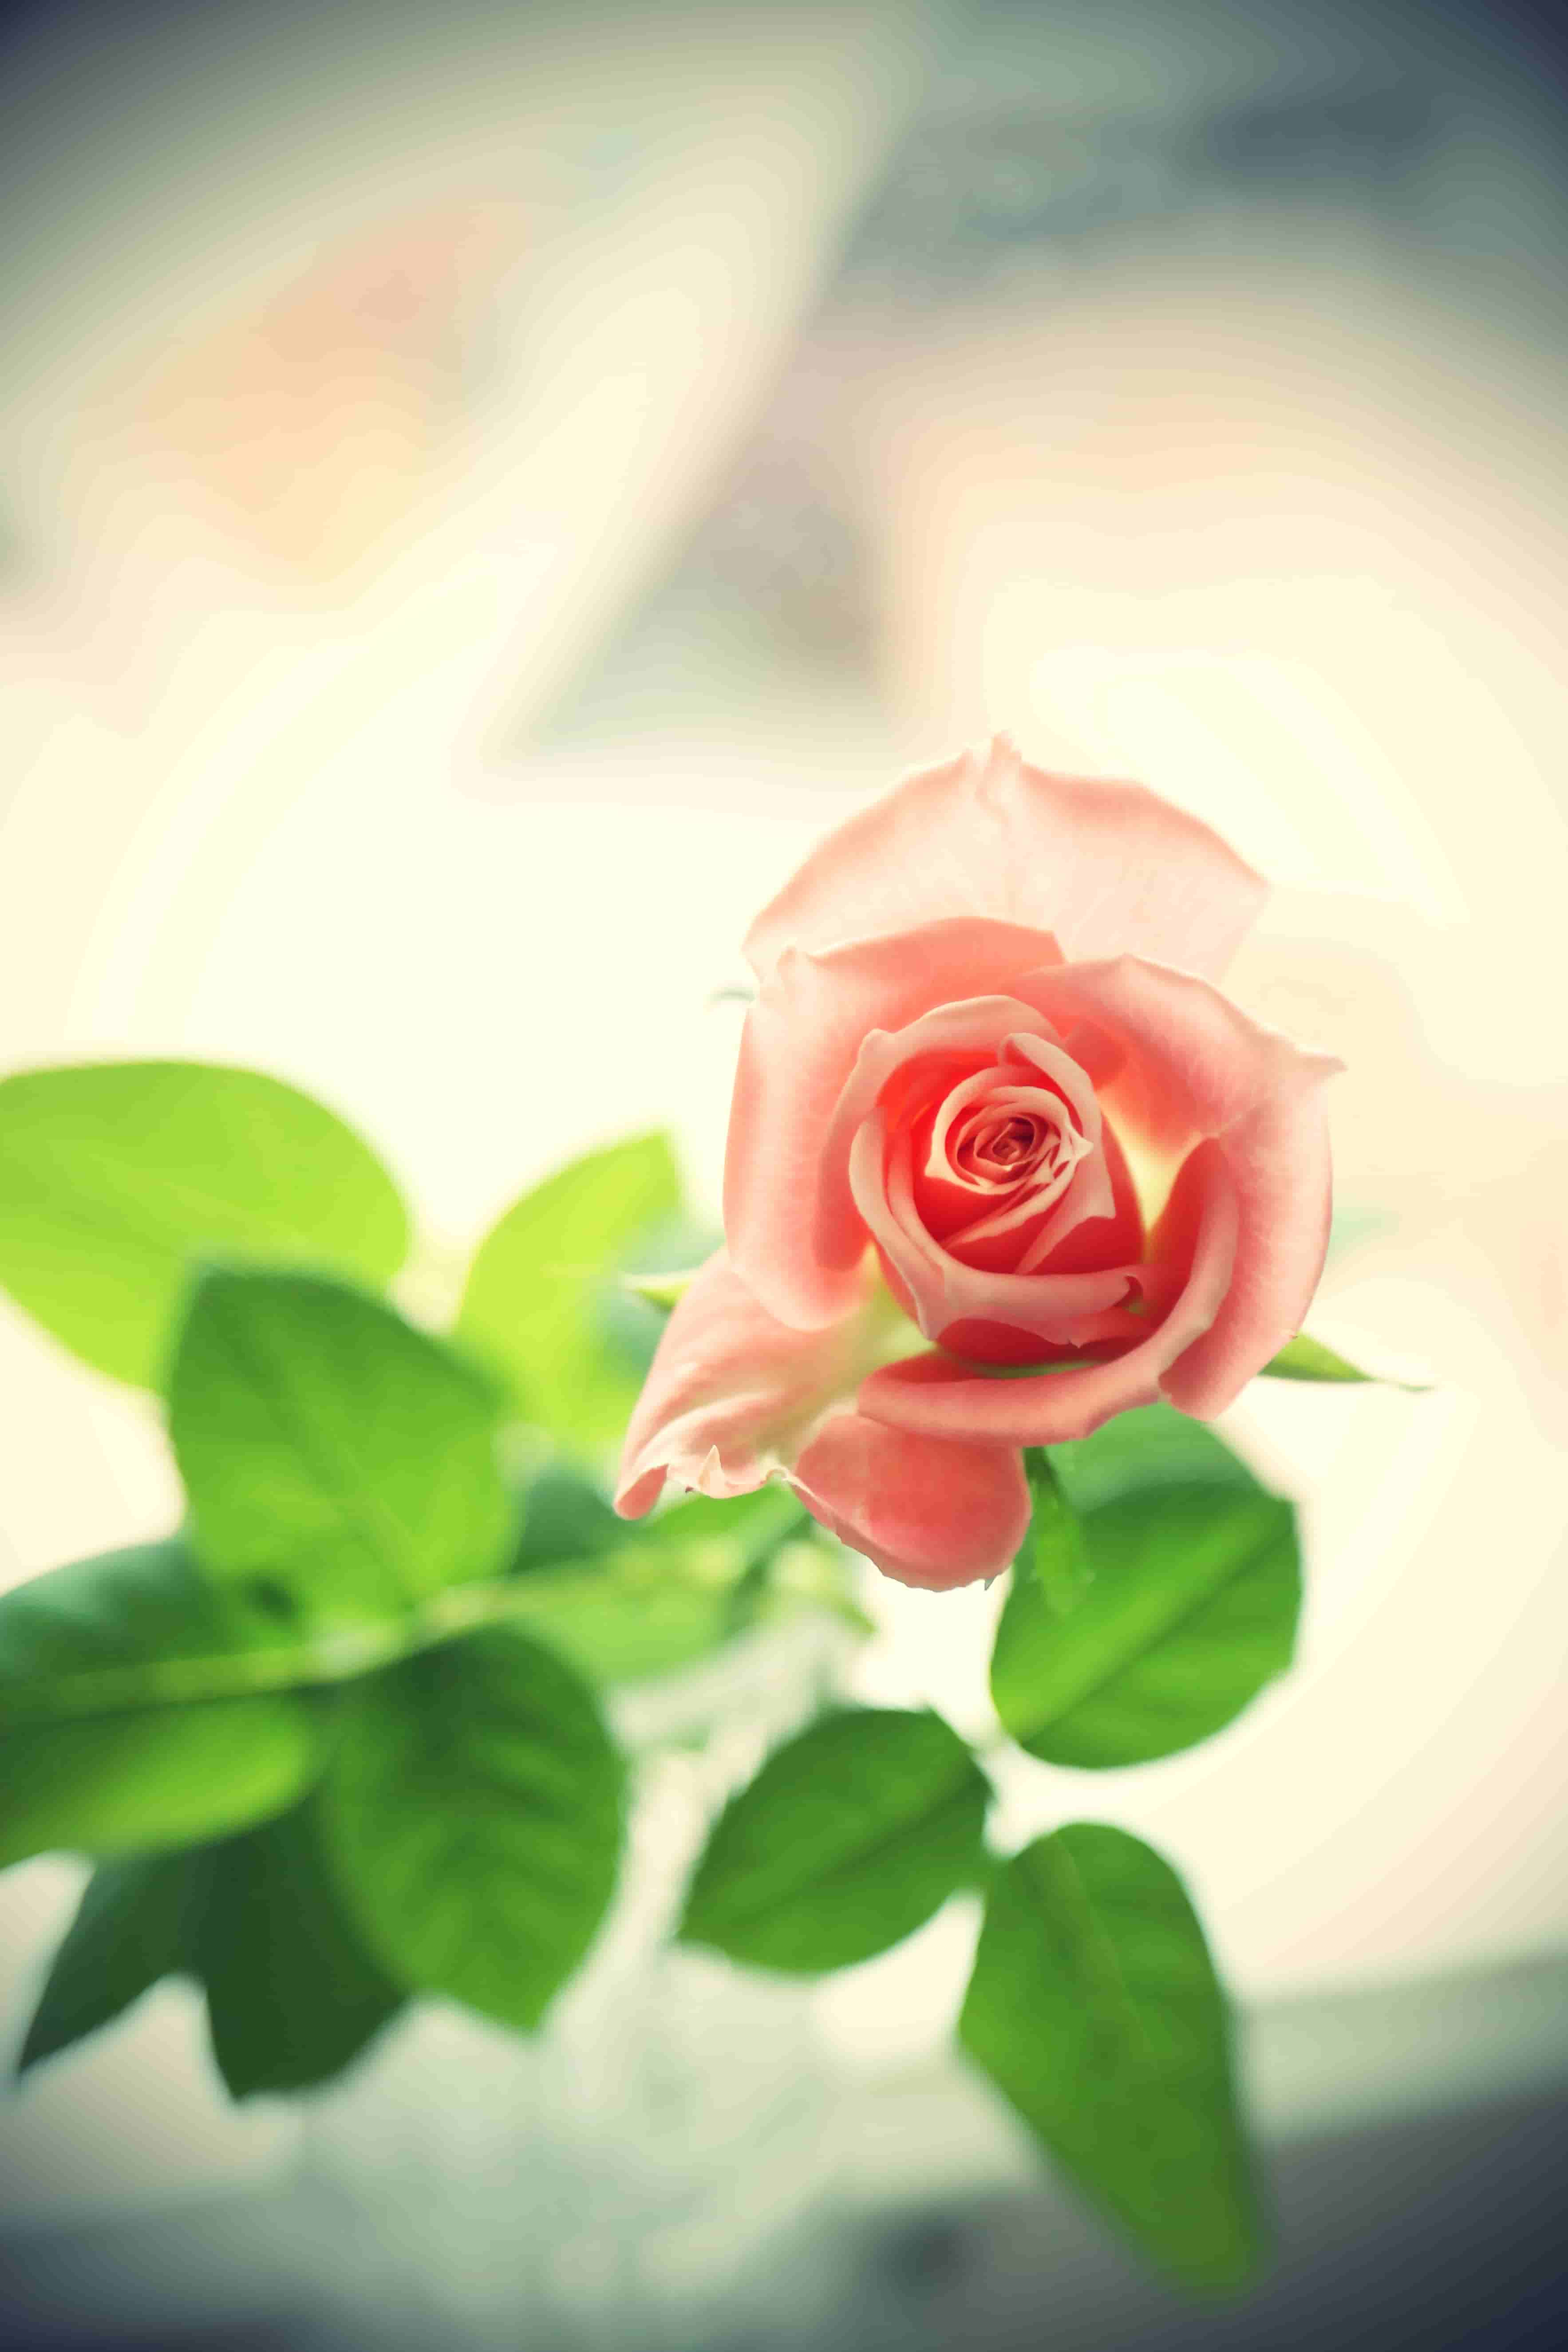 Most romantic Pink Rose Image